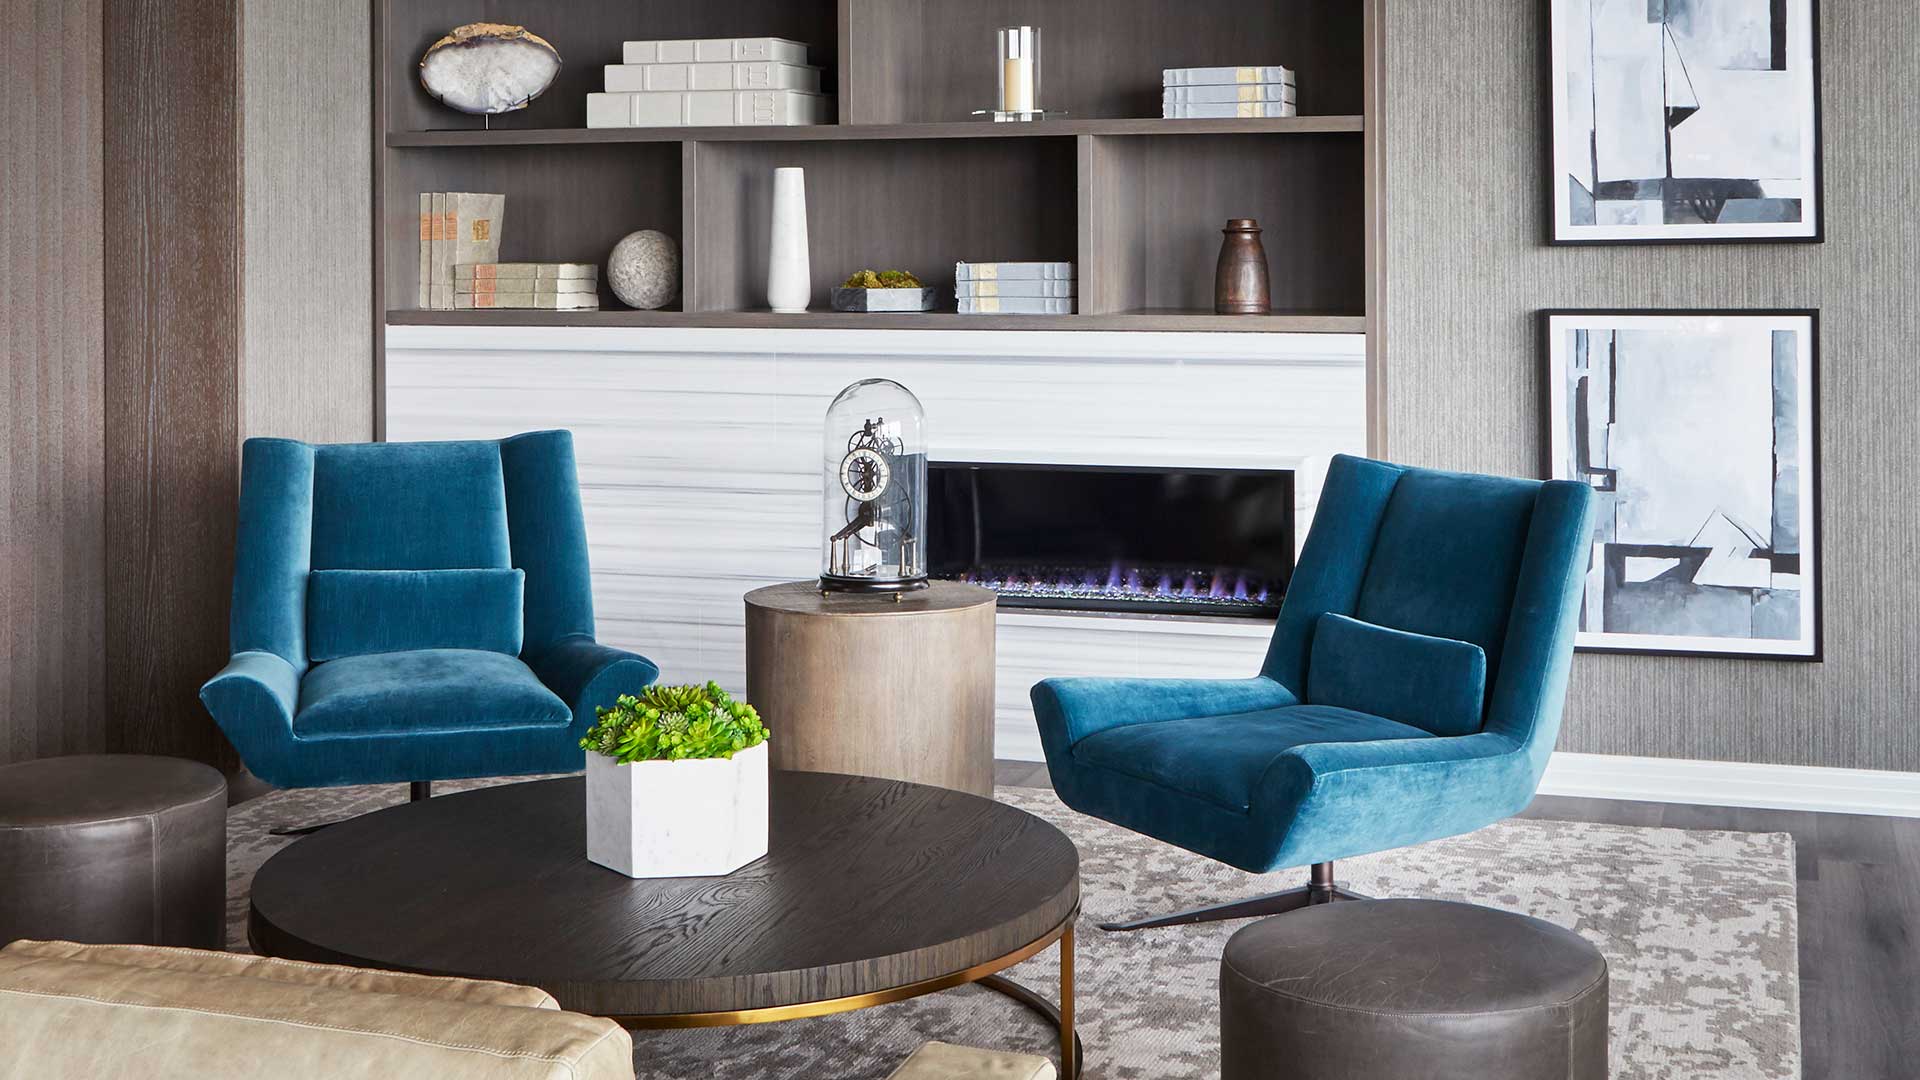 Club furniture around a round coffee table. A built-in bookshelf and fireplace are behind.